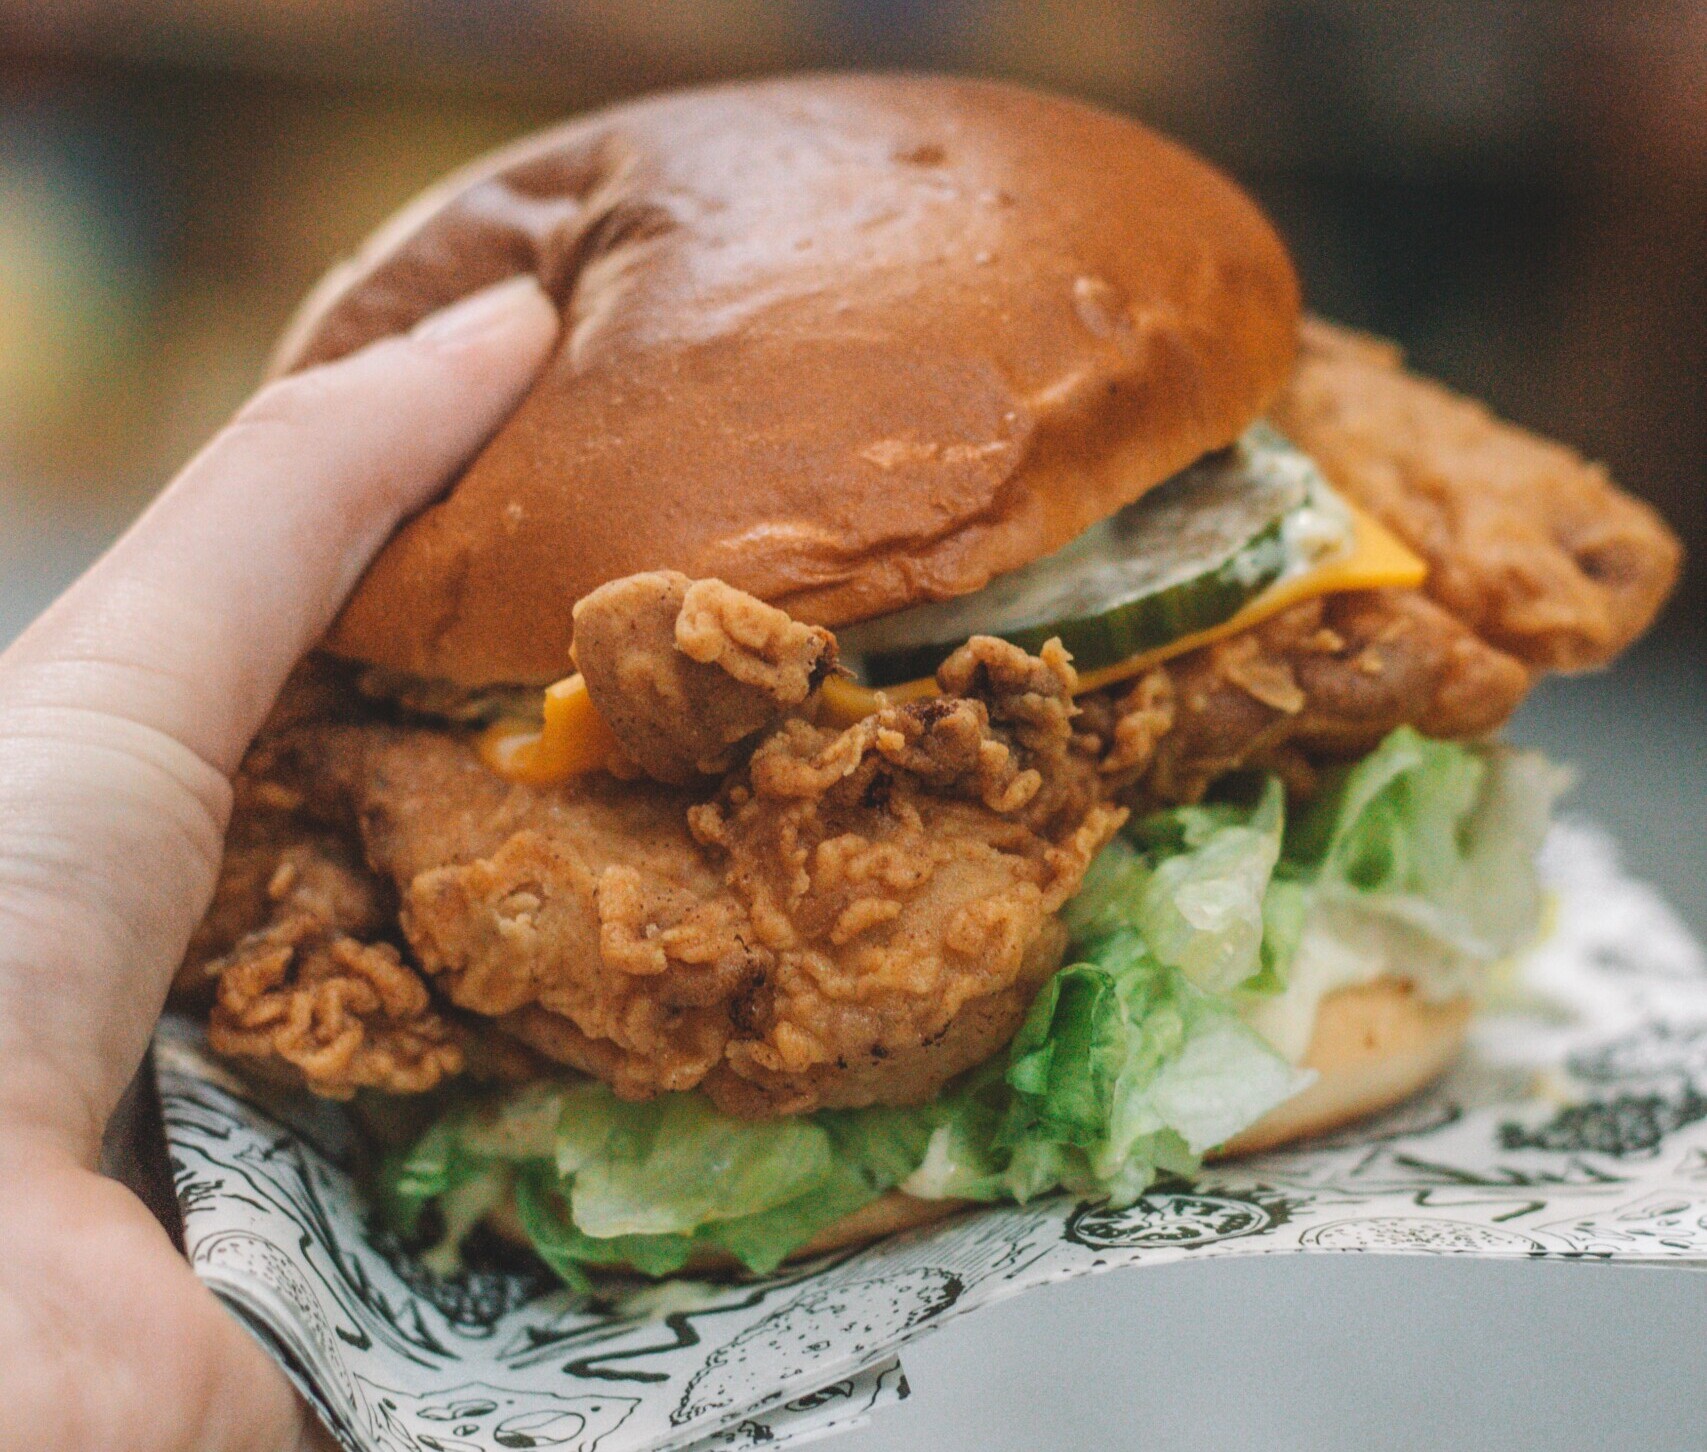 National Fried Chicken Sandwich Day deals at Burger King, Popeyes